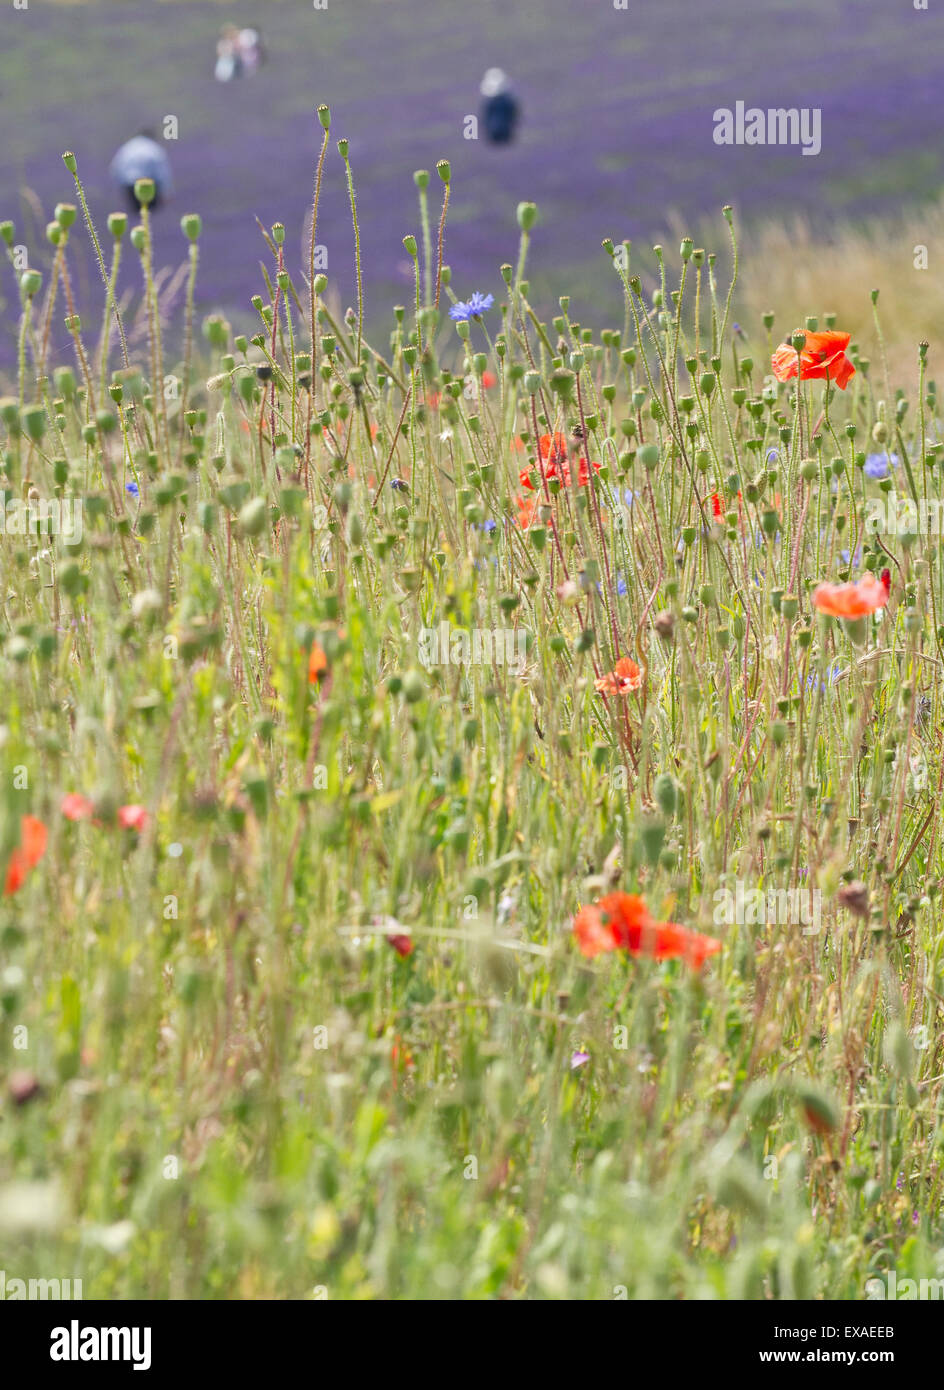 A wild flower meadow in the English countryside. Stock Photo